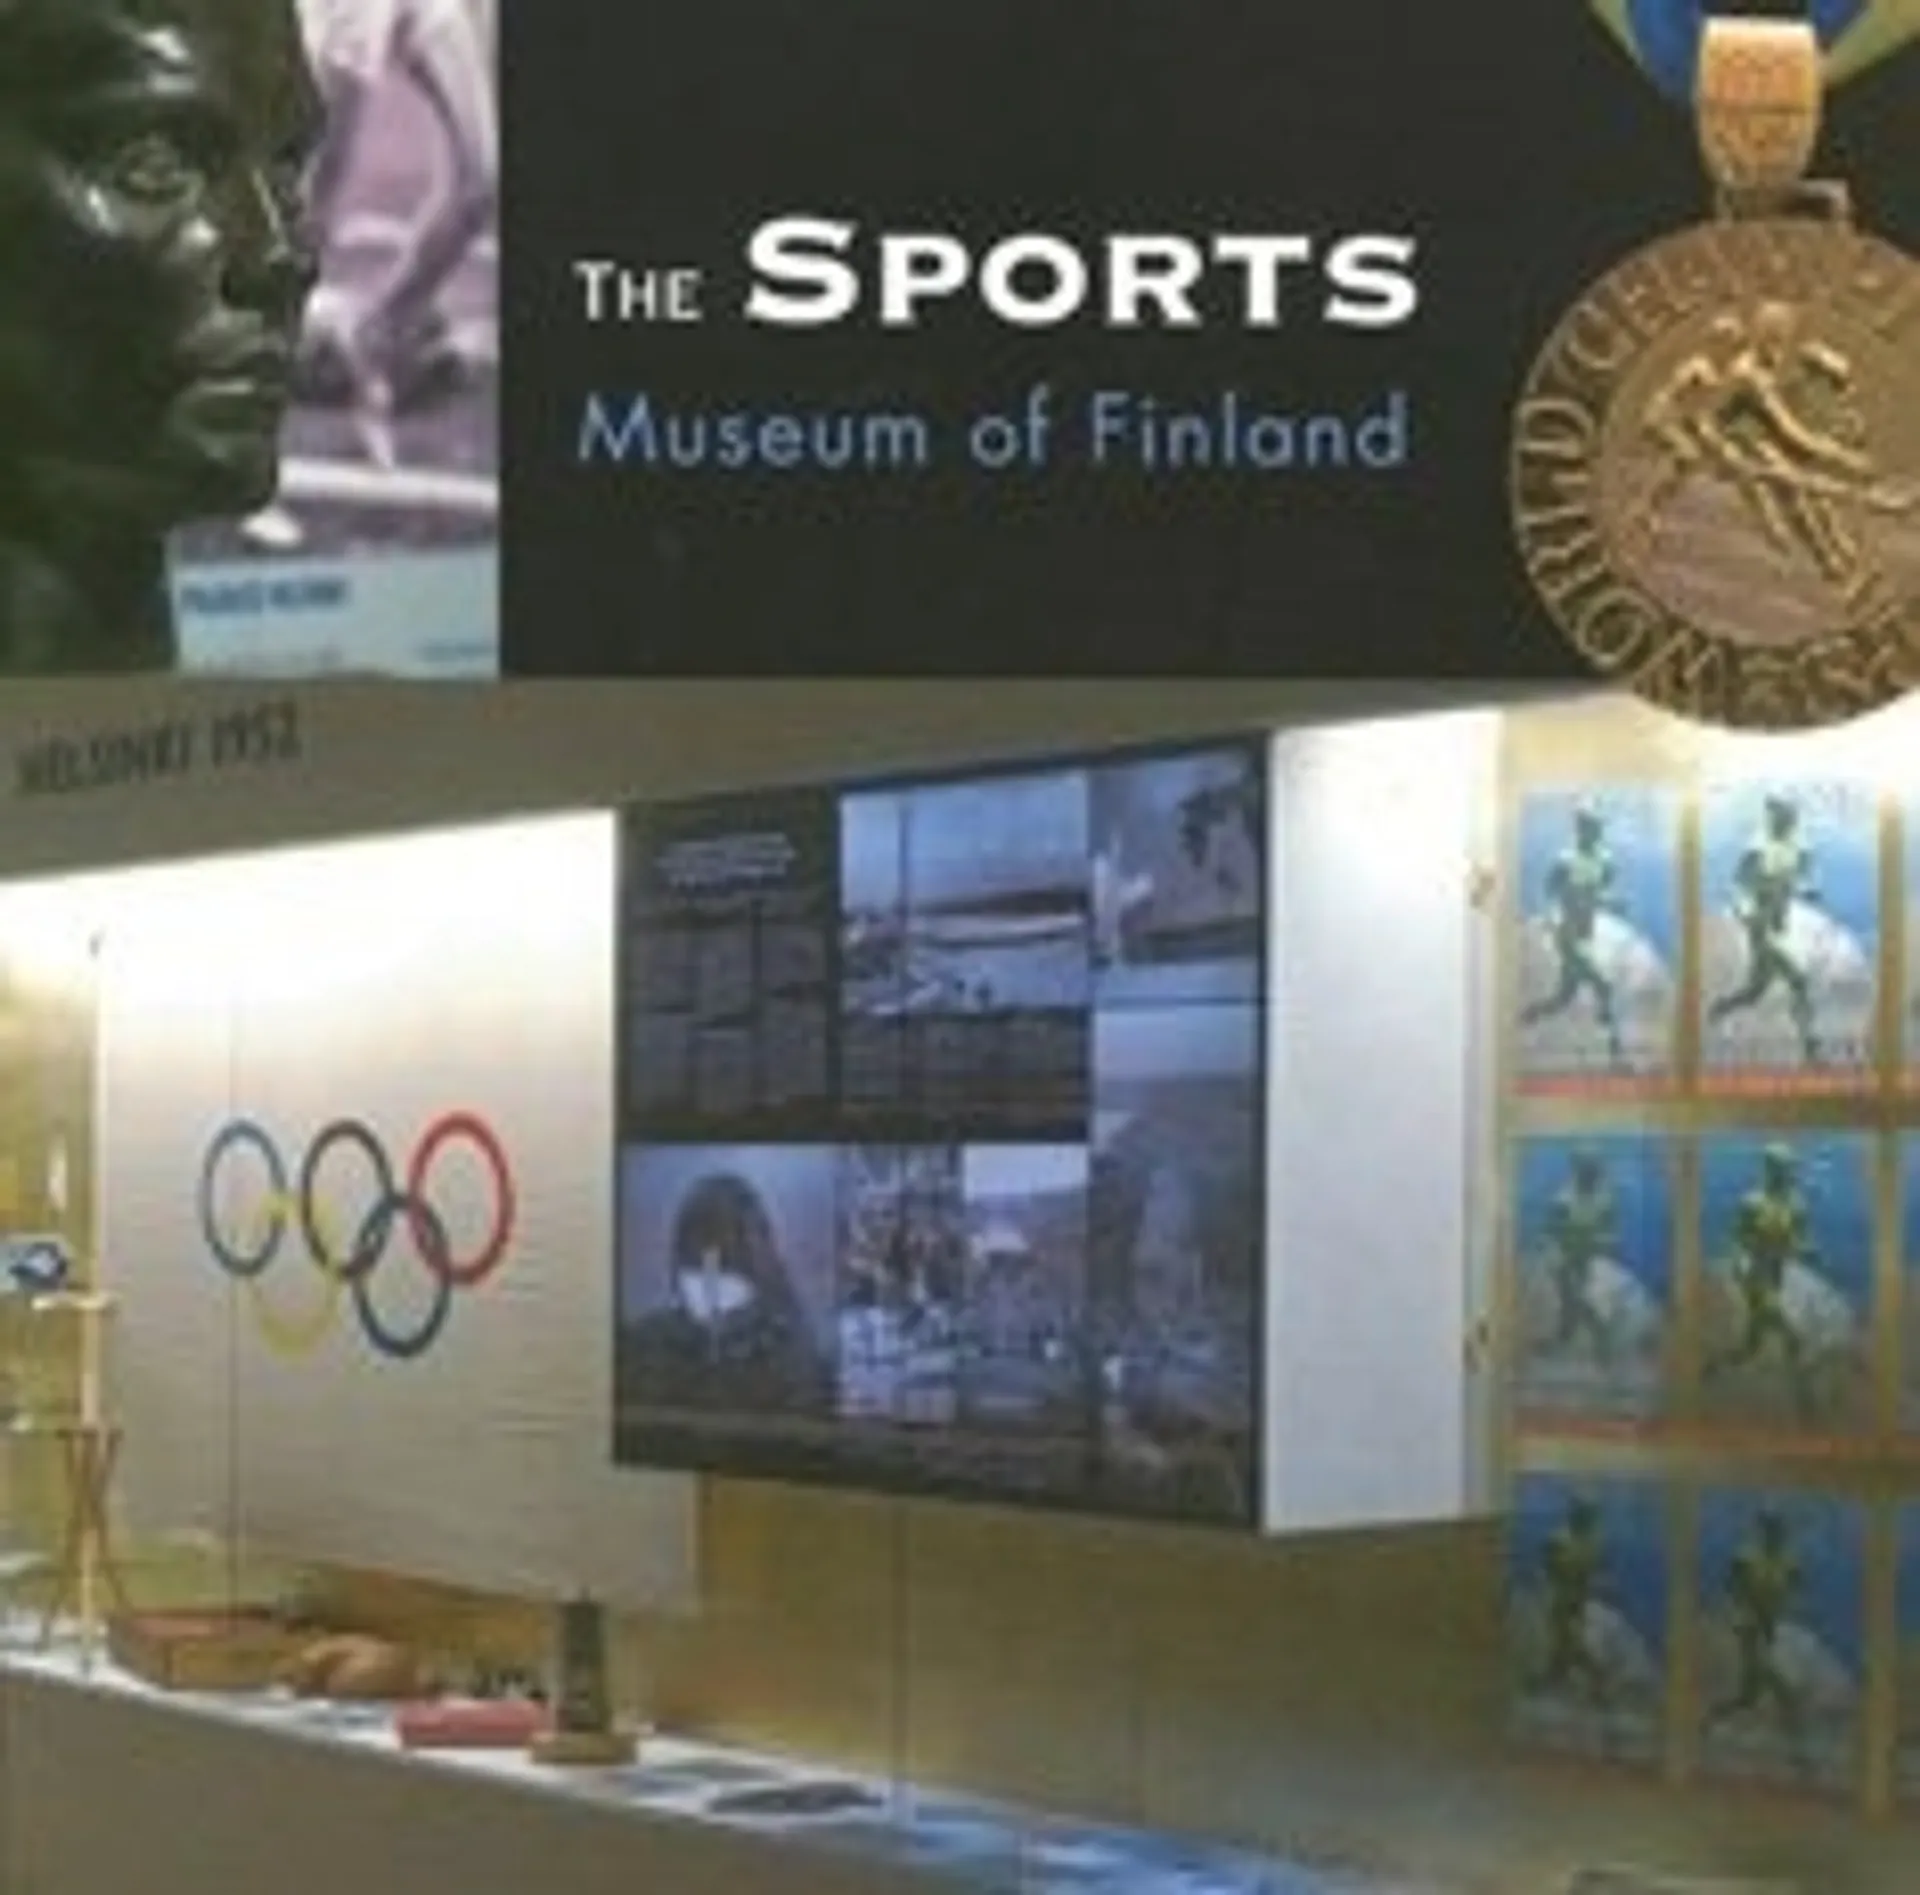 The sports museum of Finland